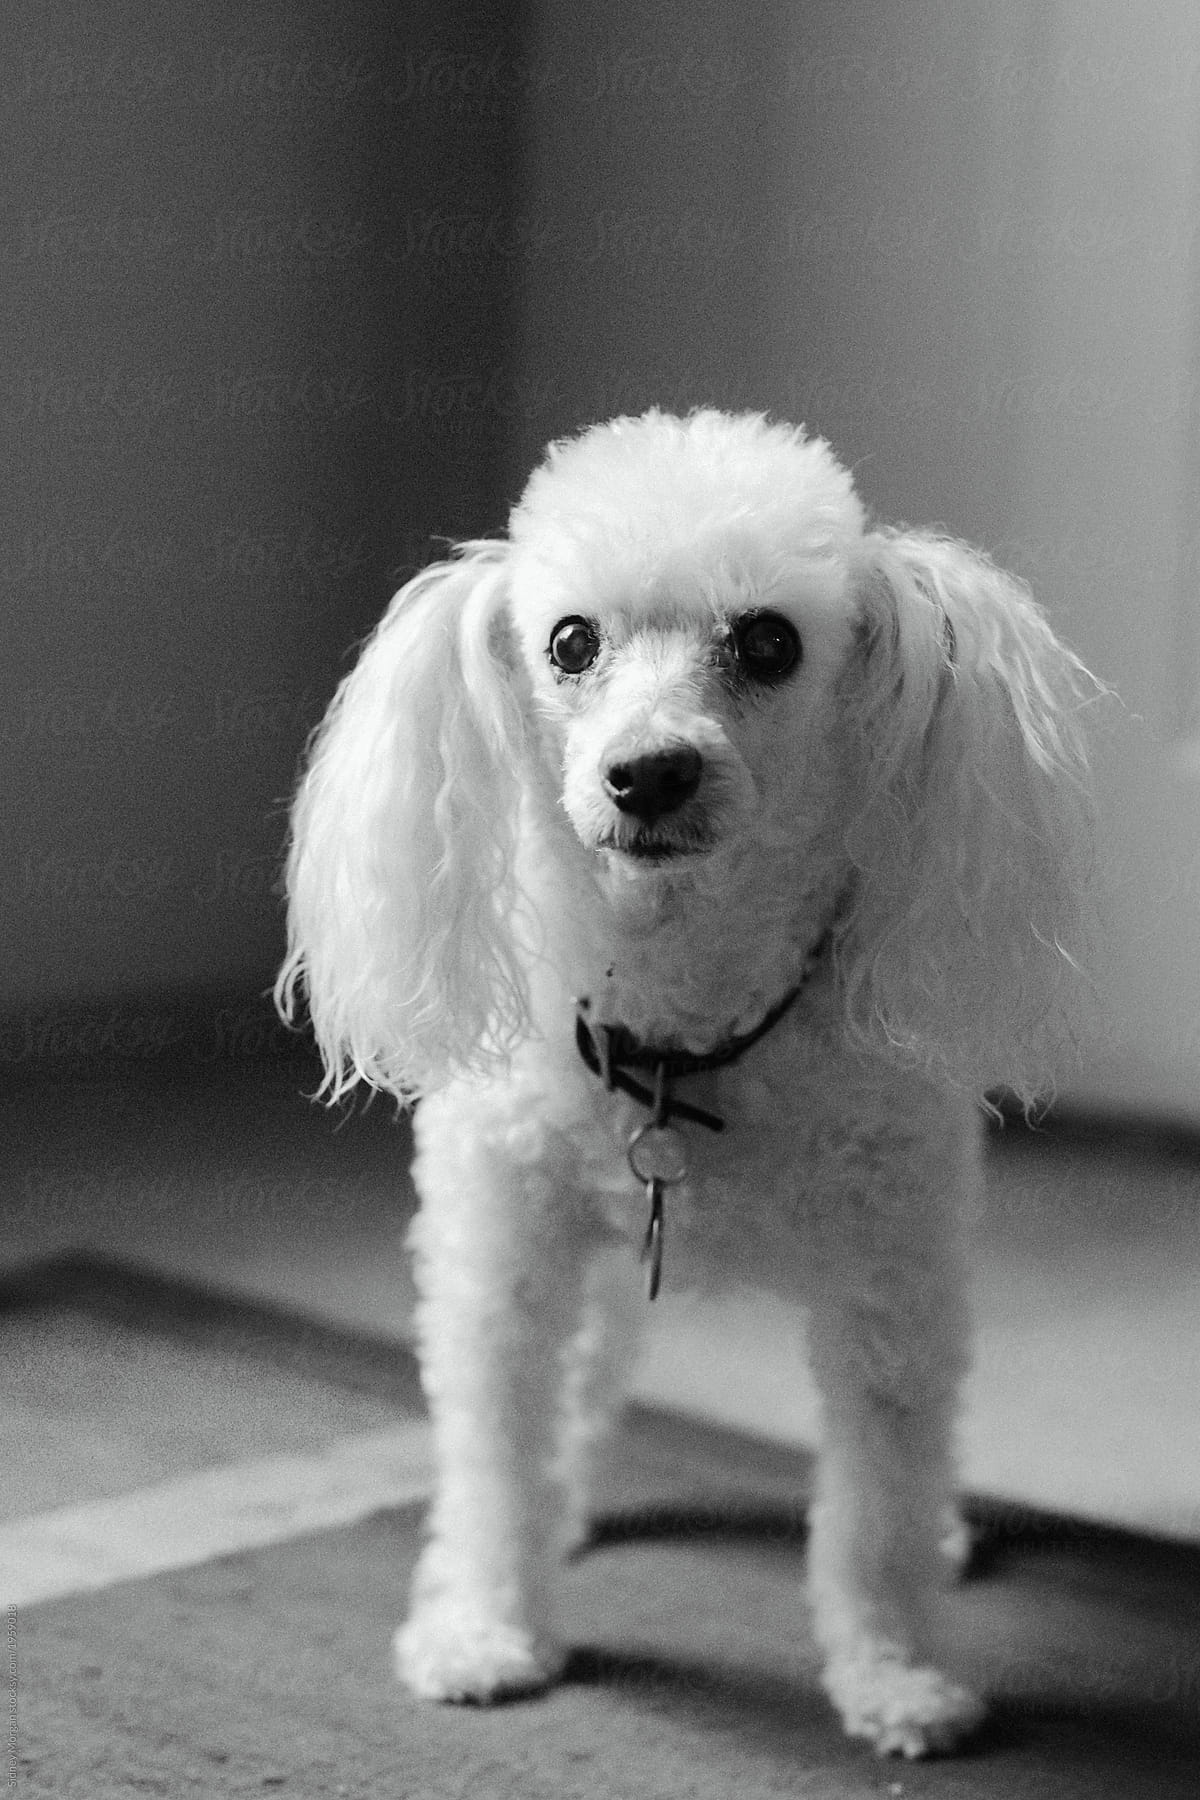 Old Poodle in Black and White